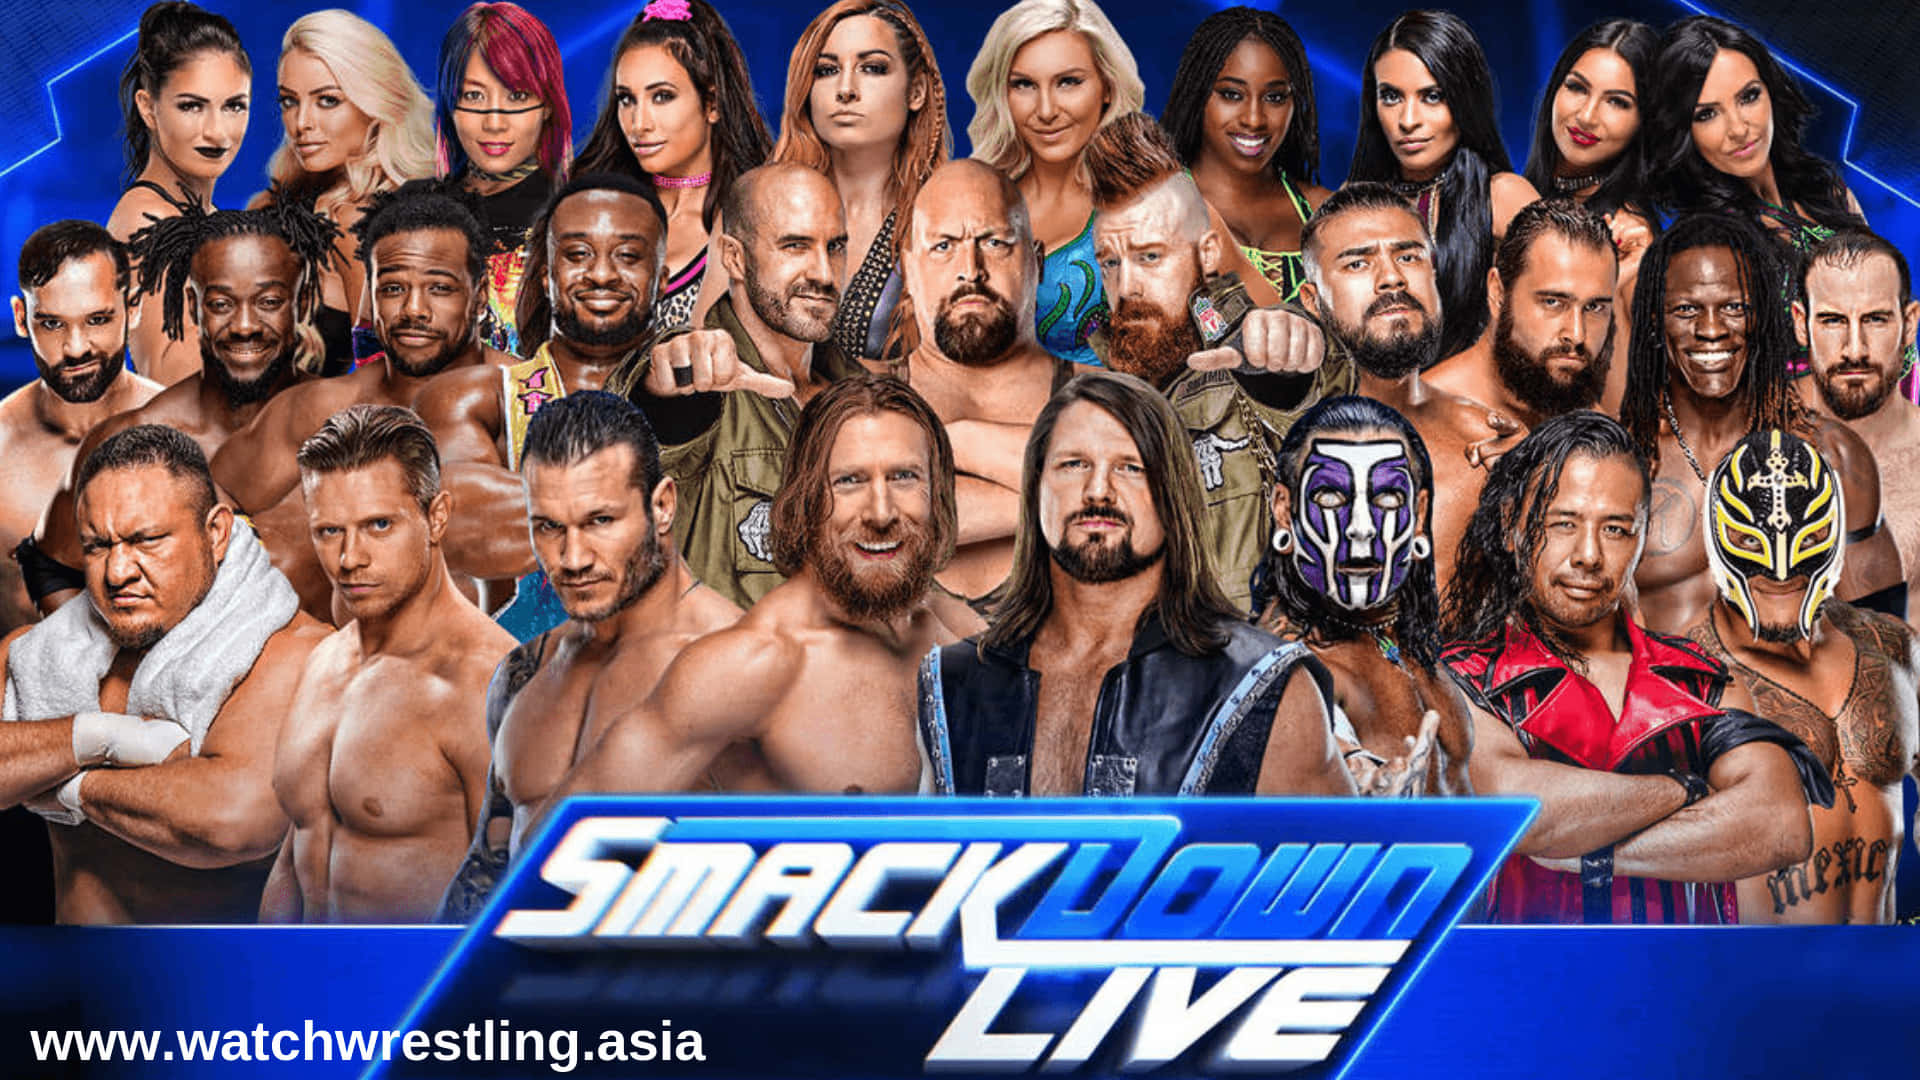 Get Ready for Exciting Action in WWE Smackdown! Wallpaper